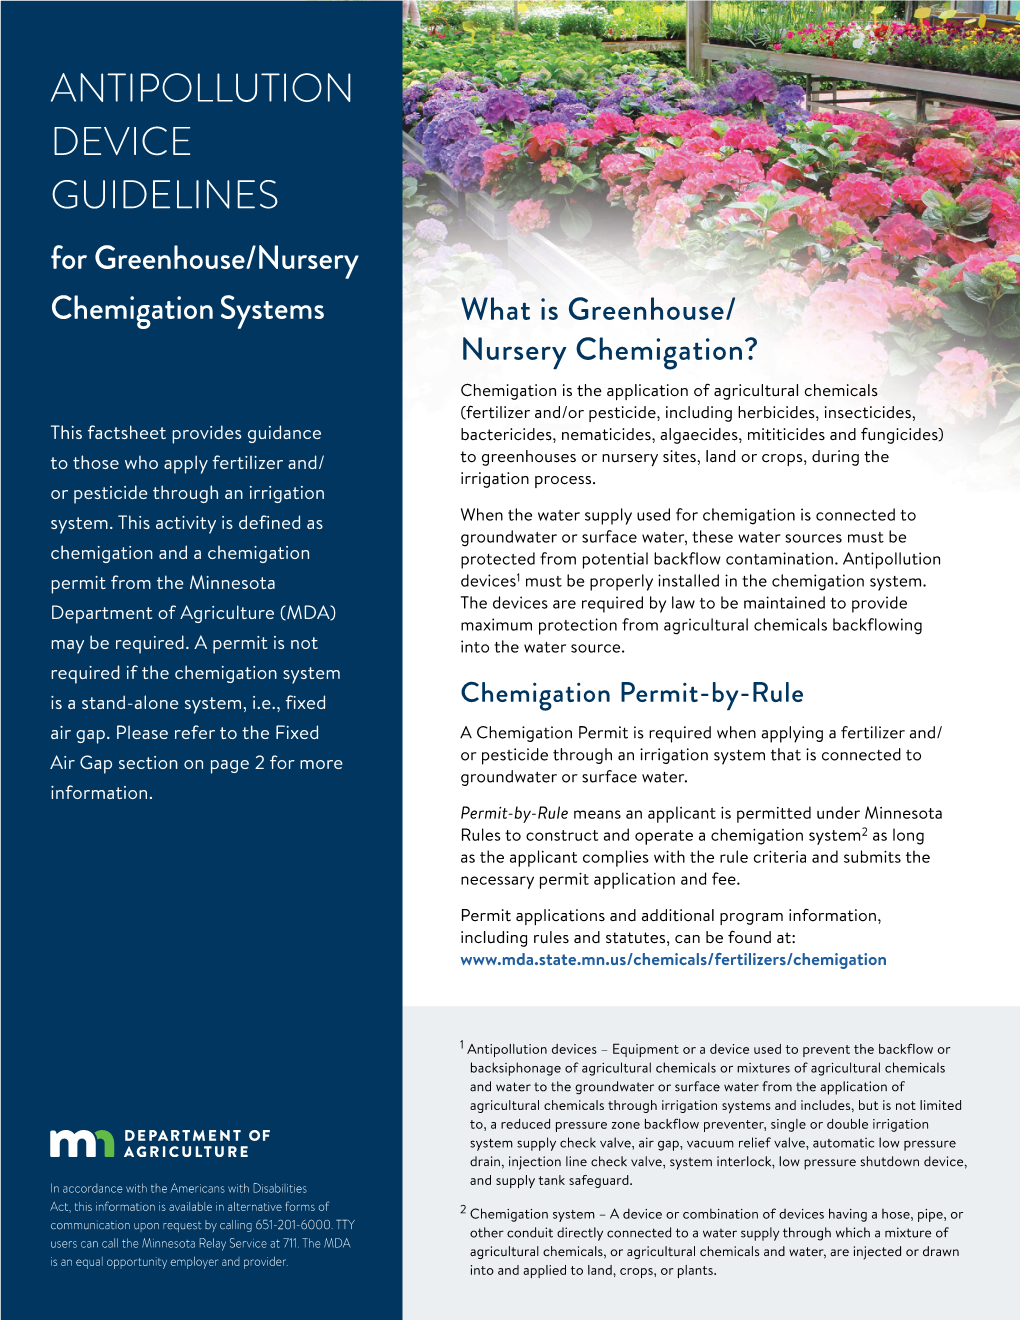 Antipollution Device Guidelines for Greenhouse/Nursery Chemigation